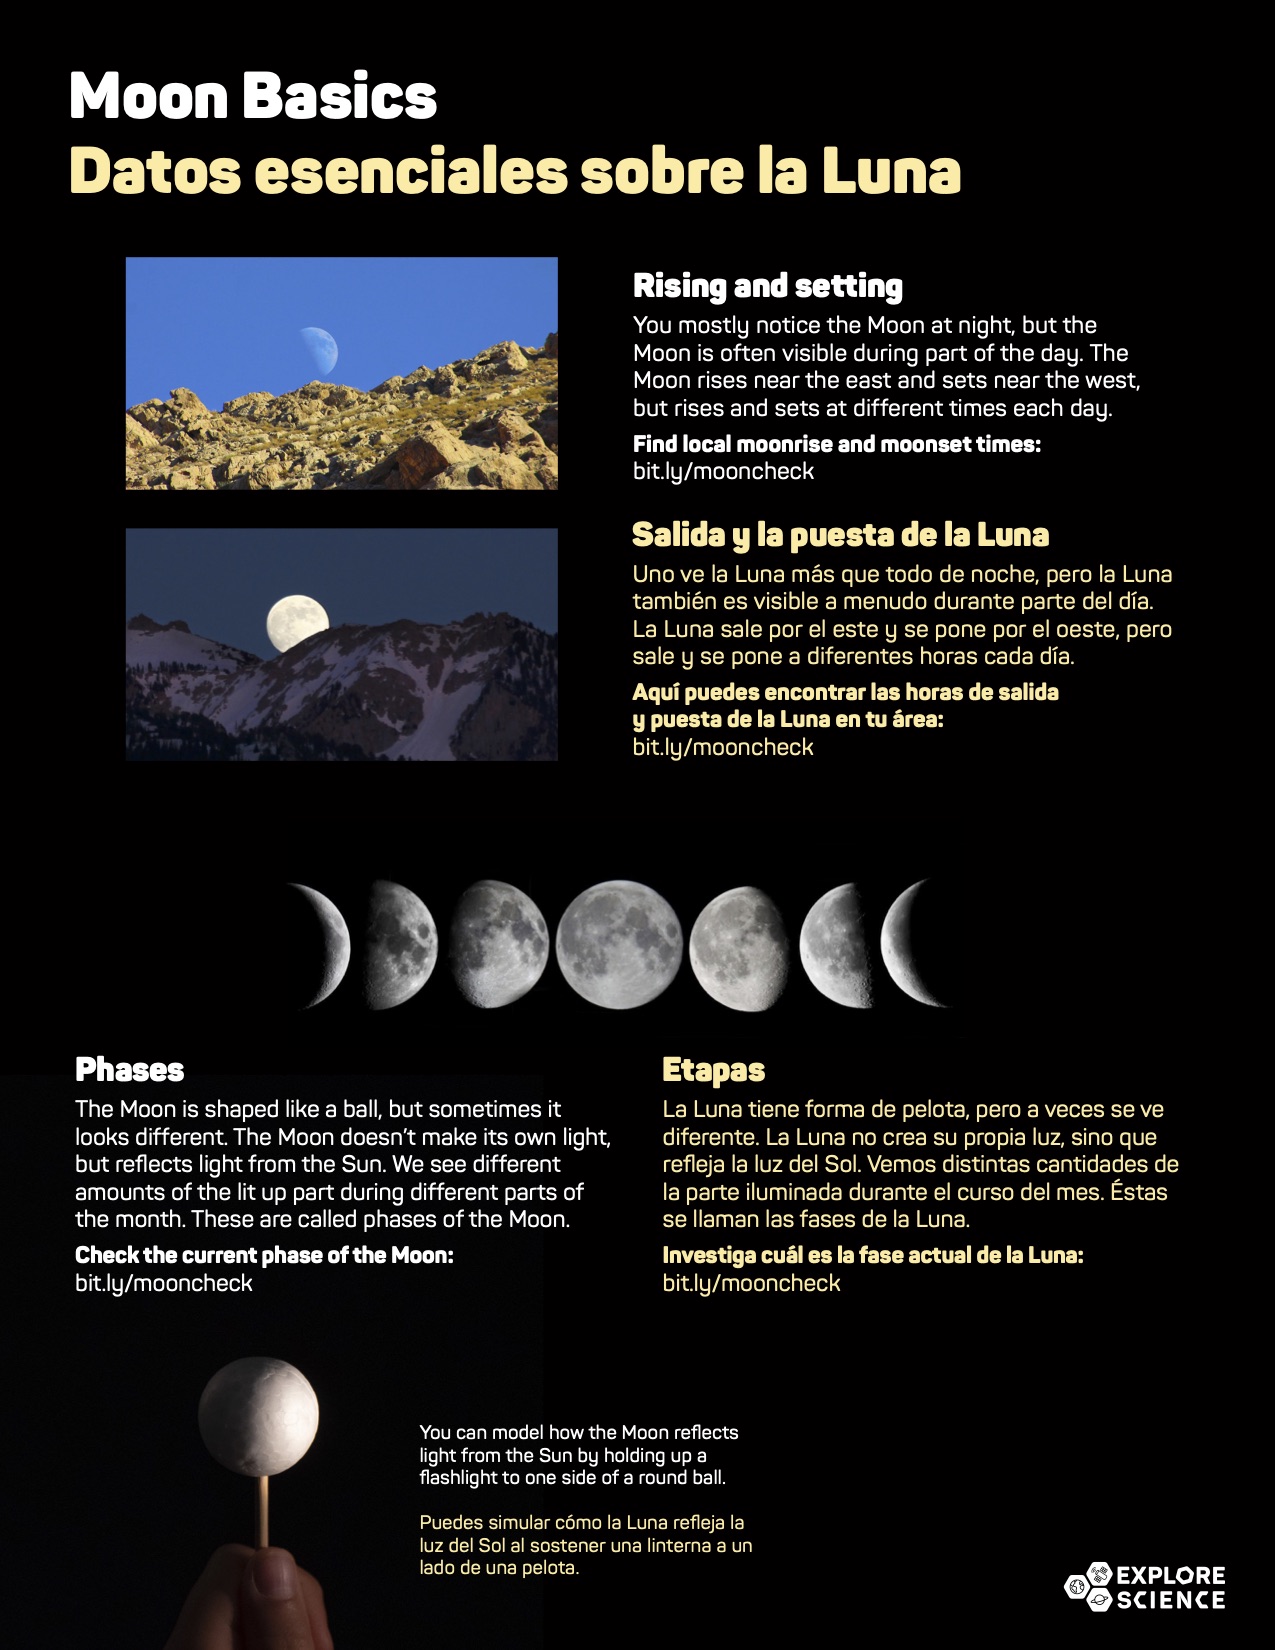 Observing the Fascinating Full Moon Using Mobile Apps: Part 2